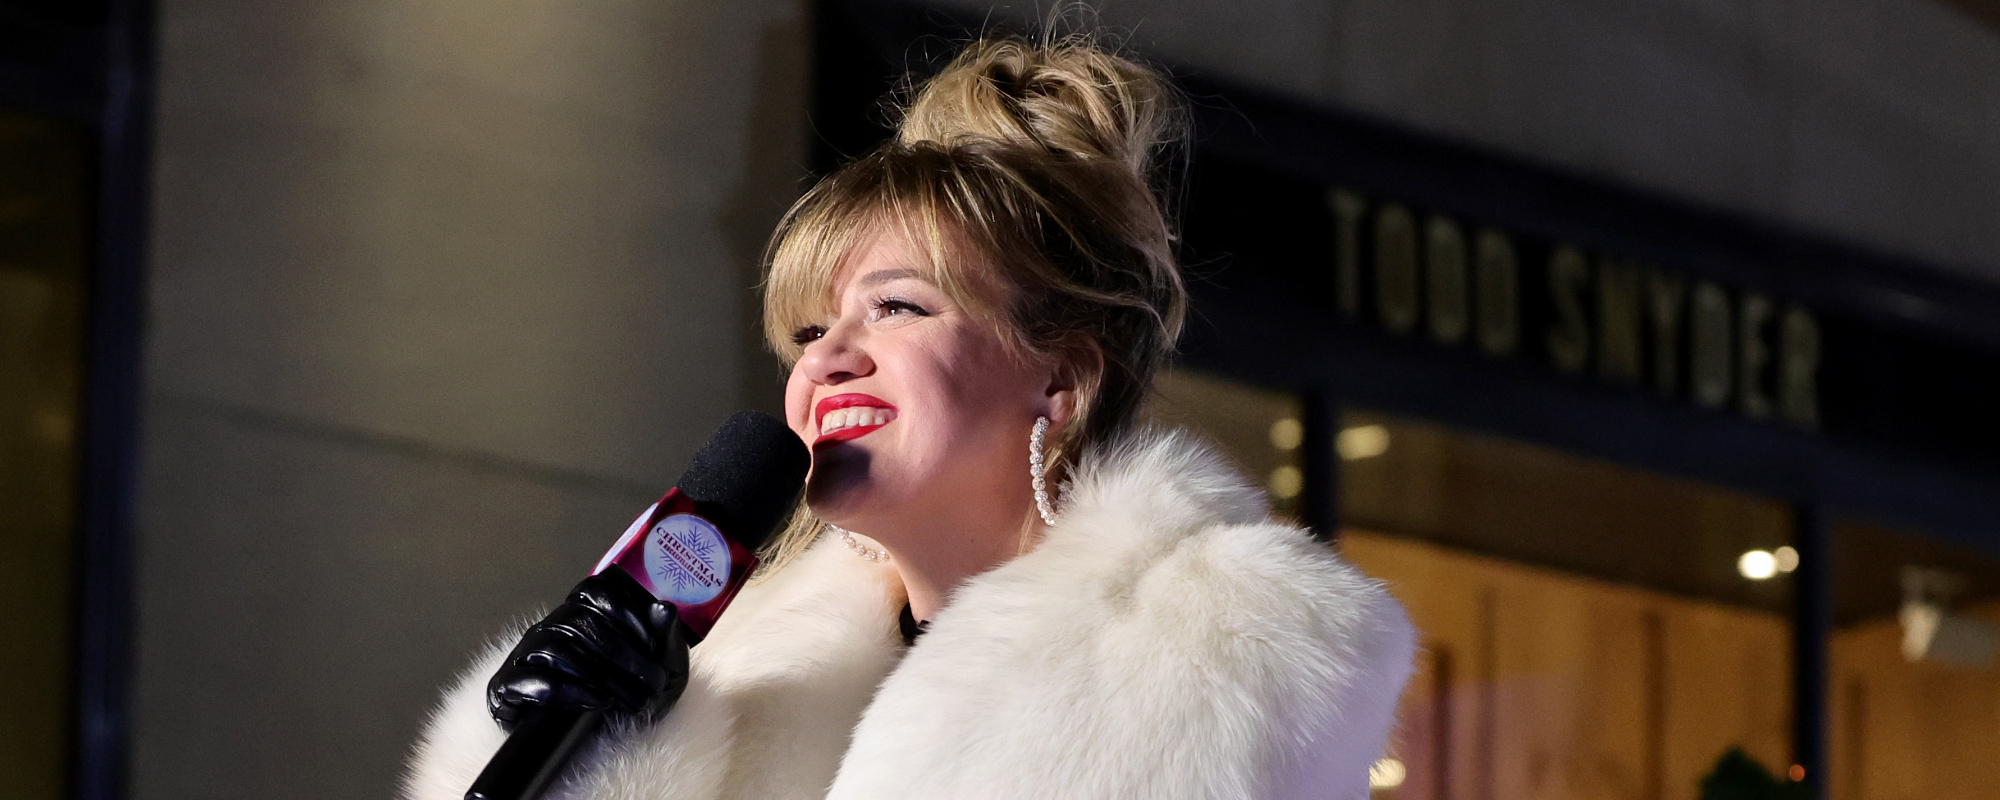 Kelly Clarkson Voices Bold Take on Cher’s New Christmas Hit: “Fight Me on It”